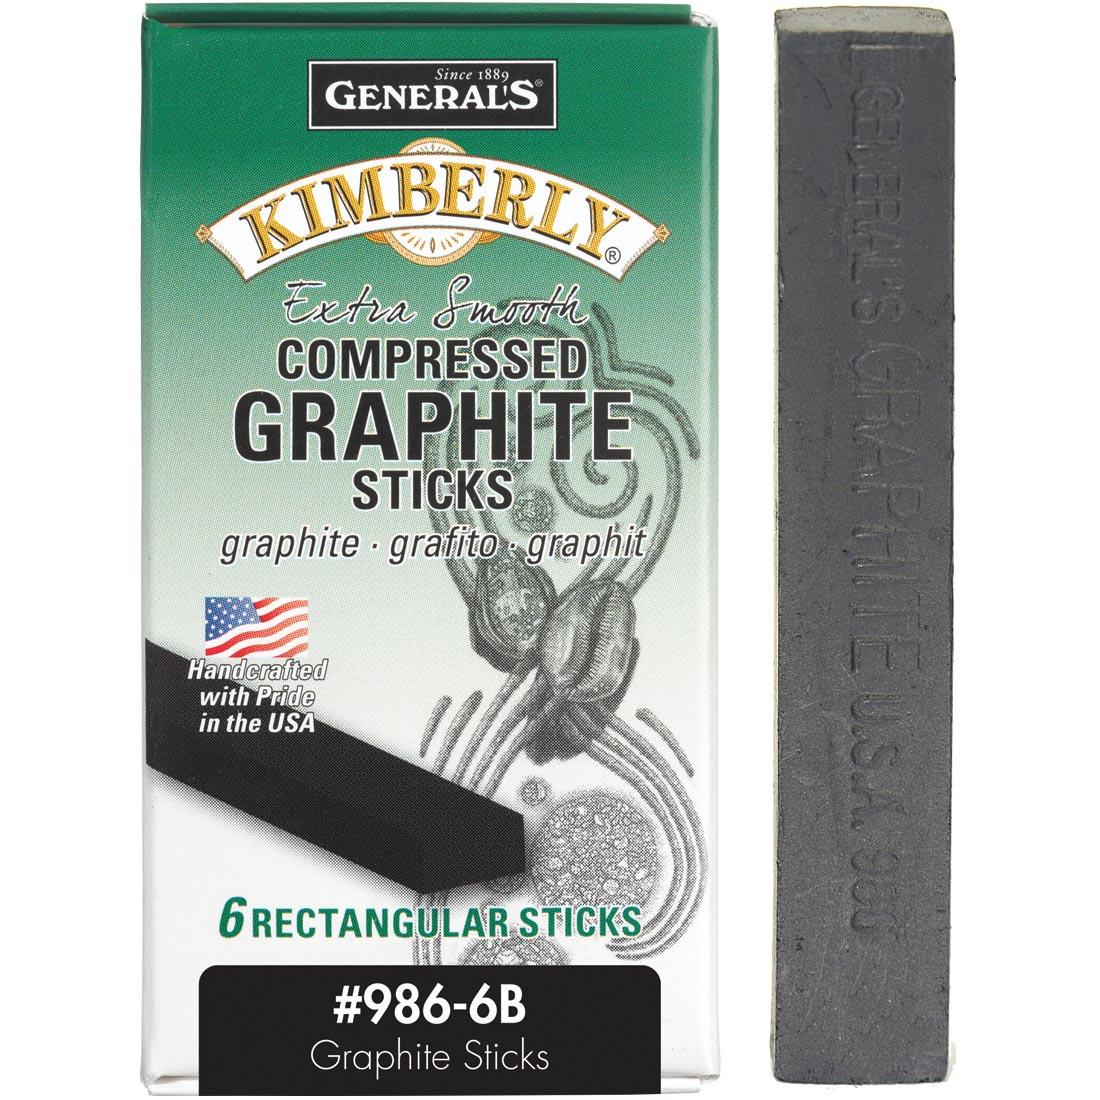 General's Kimberly Compressed Graphite Sticks 6B 6-Count Package with a single one shown outside the box